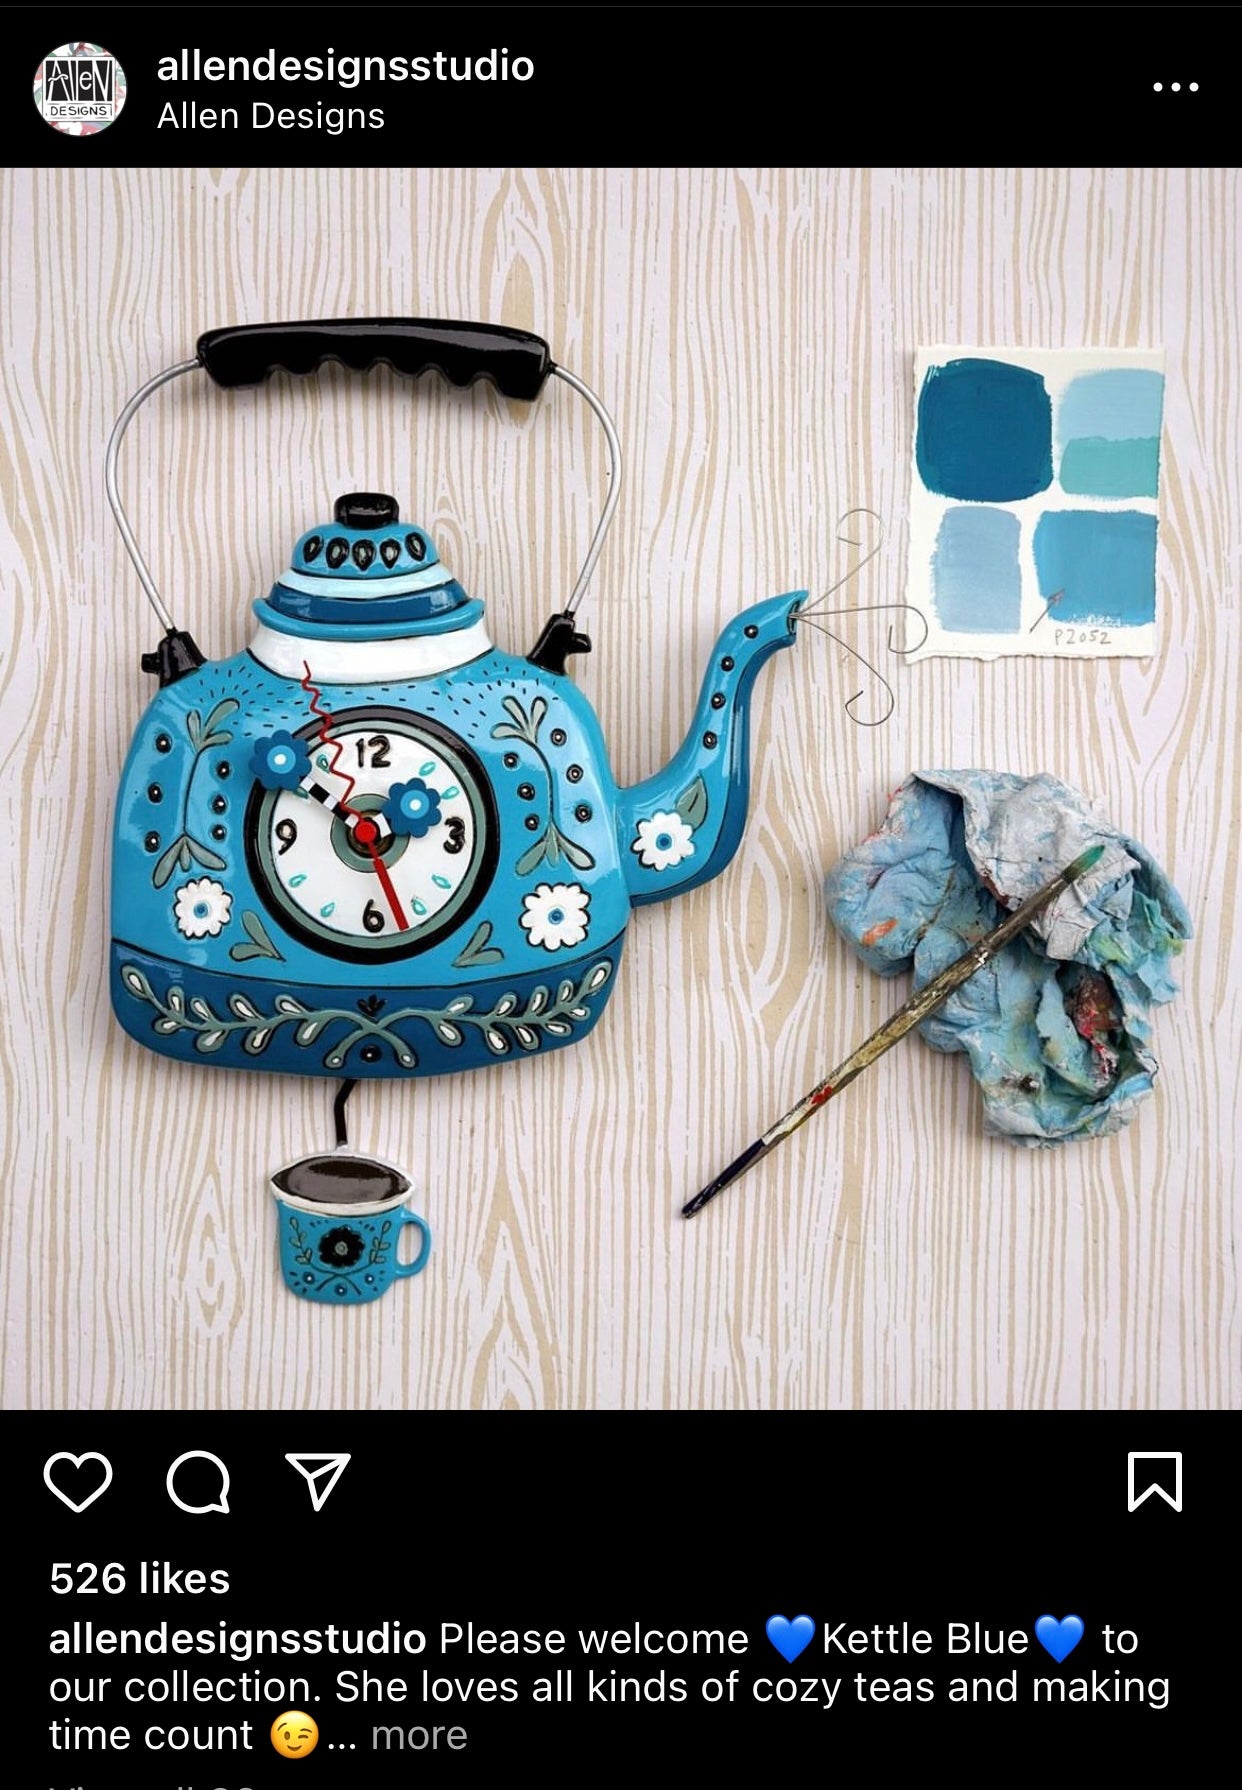 Clock Wall Kettle Blue Teapot Funky Retro - The Renmy Store Homewares & Gifts 